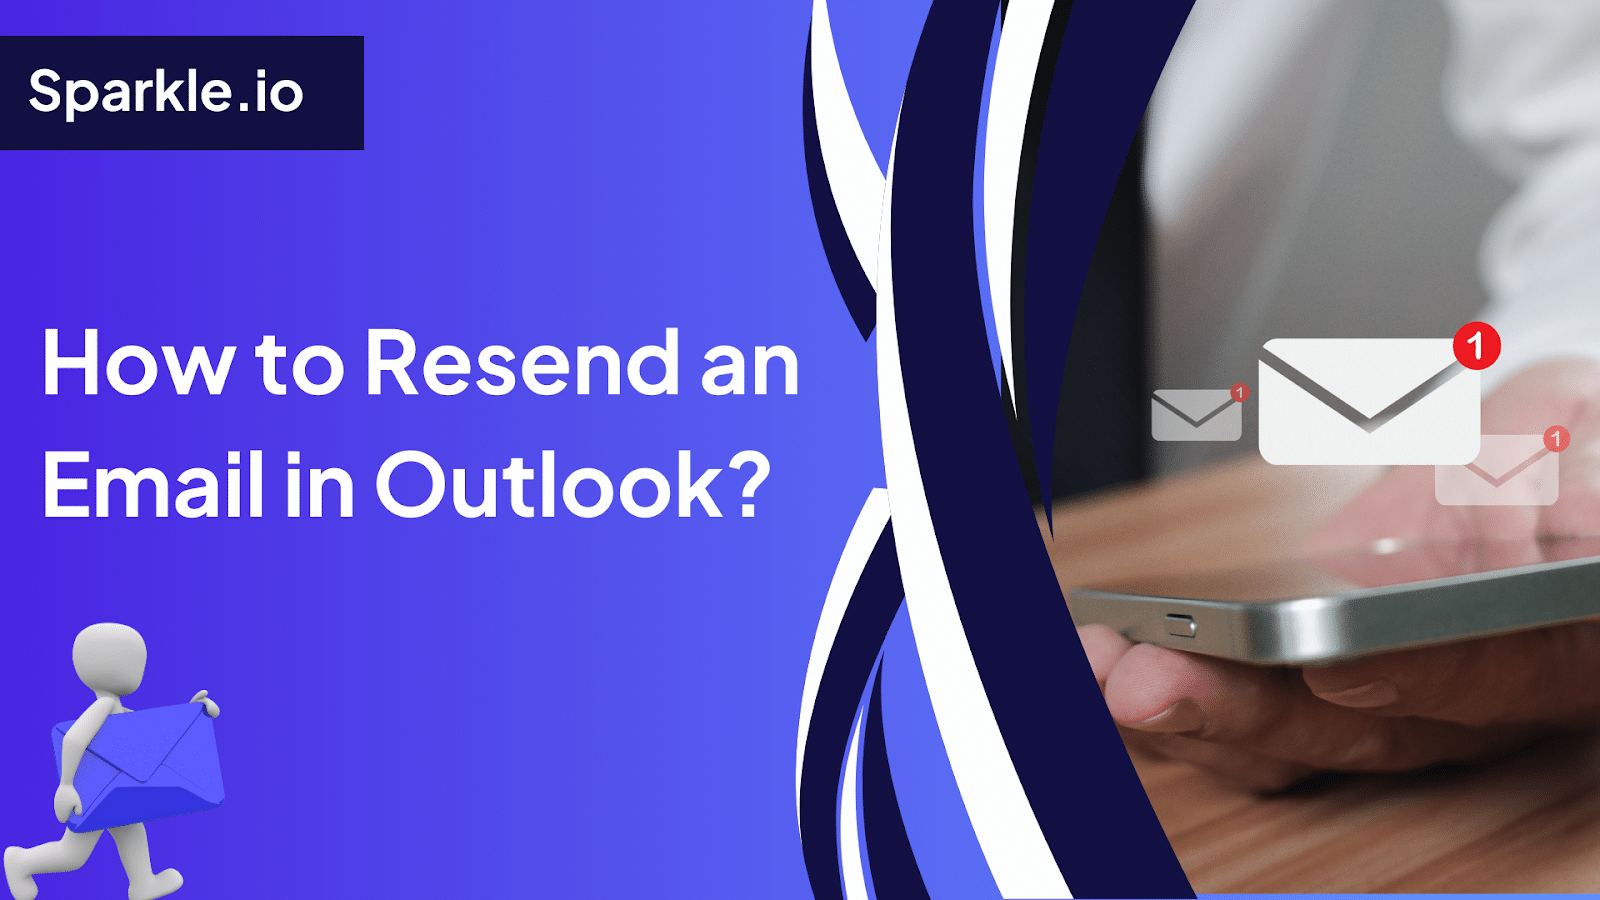 How to Resend an Email in Outlook?